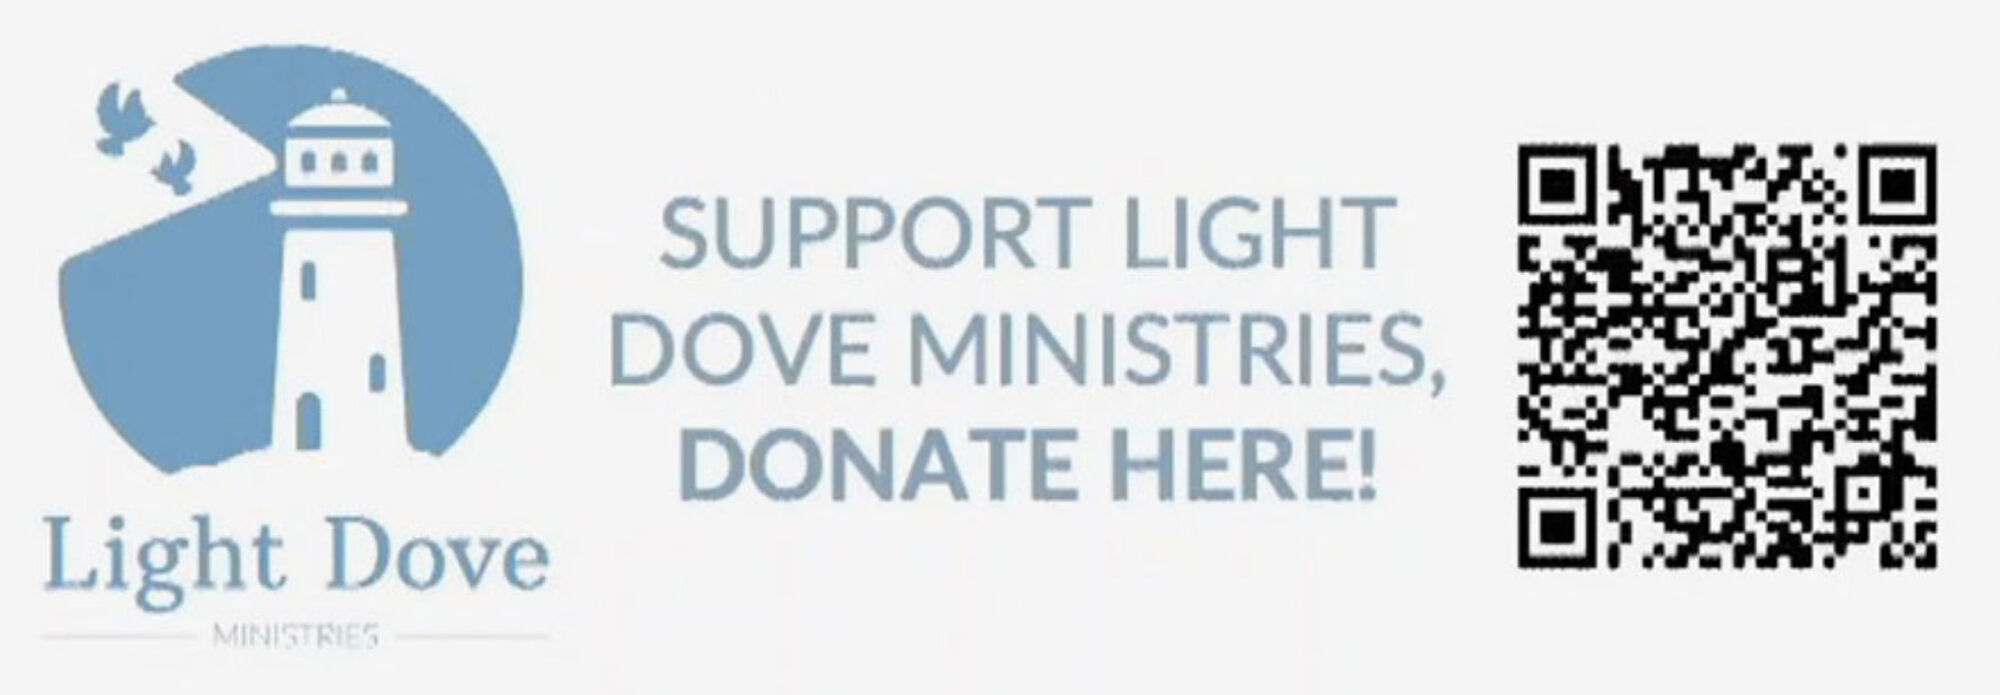 Support Light Dove Ministries Donate Here